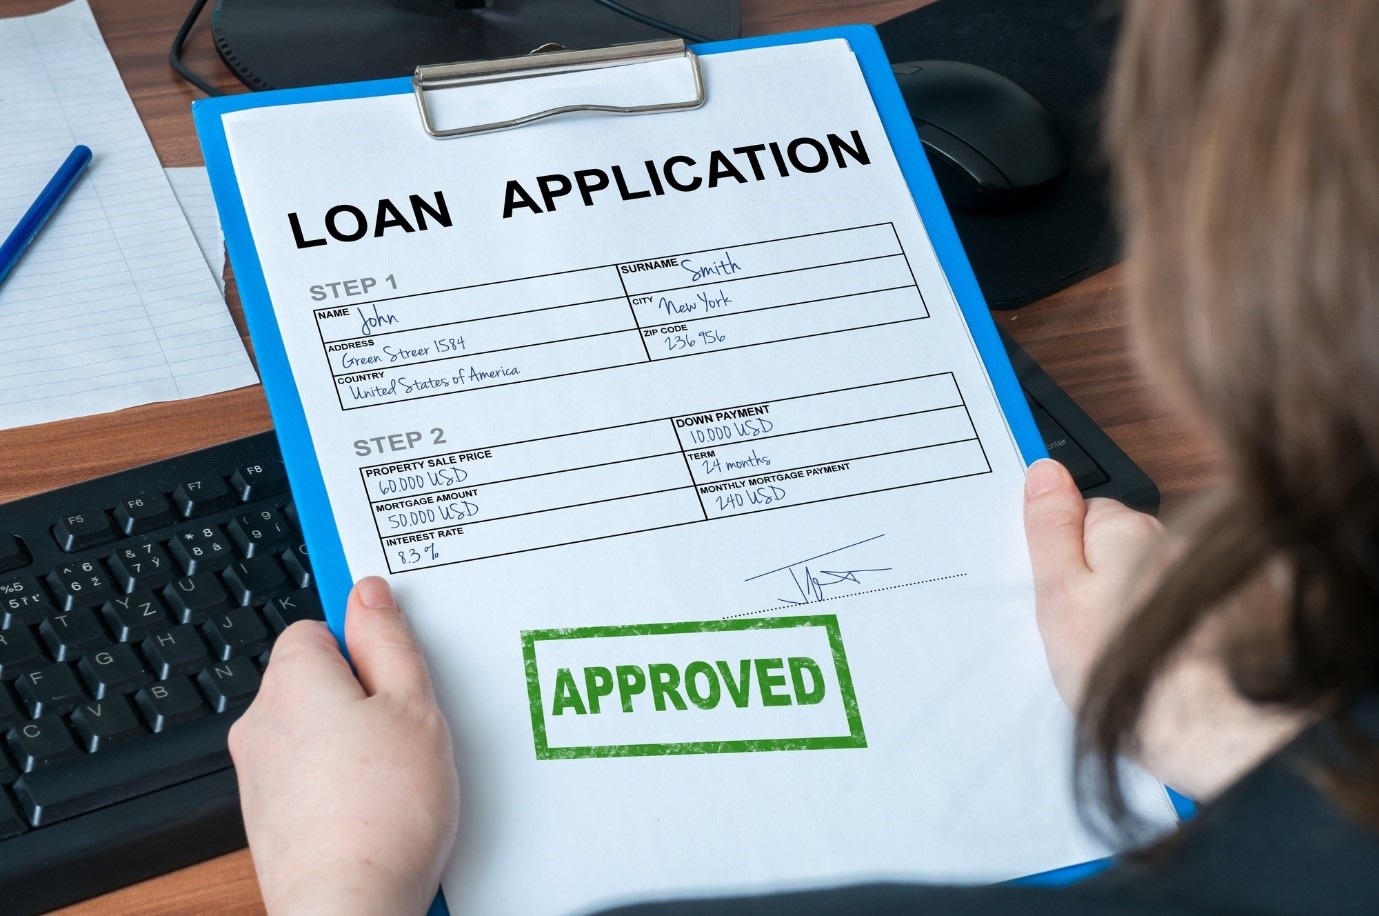 Bad Credit Scores Are Not a Problem for Small Business Loans